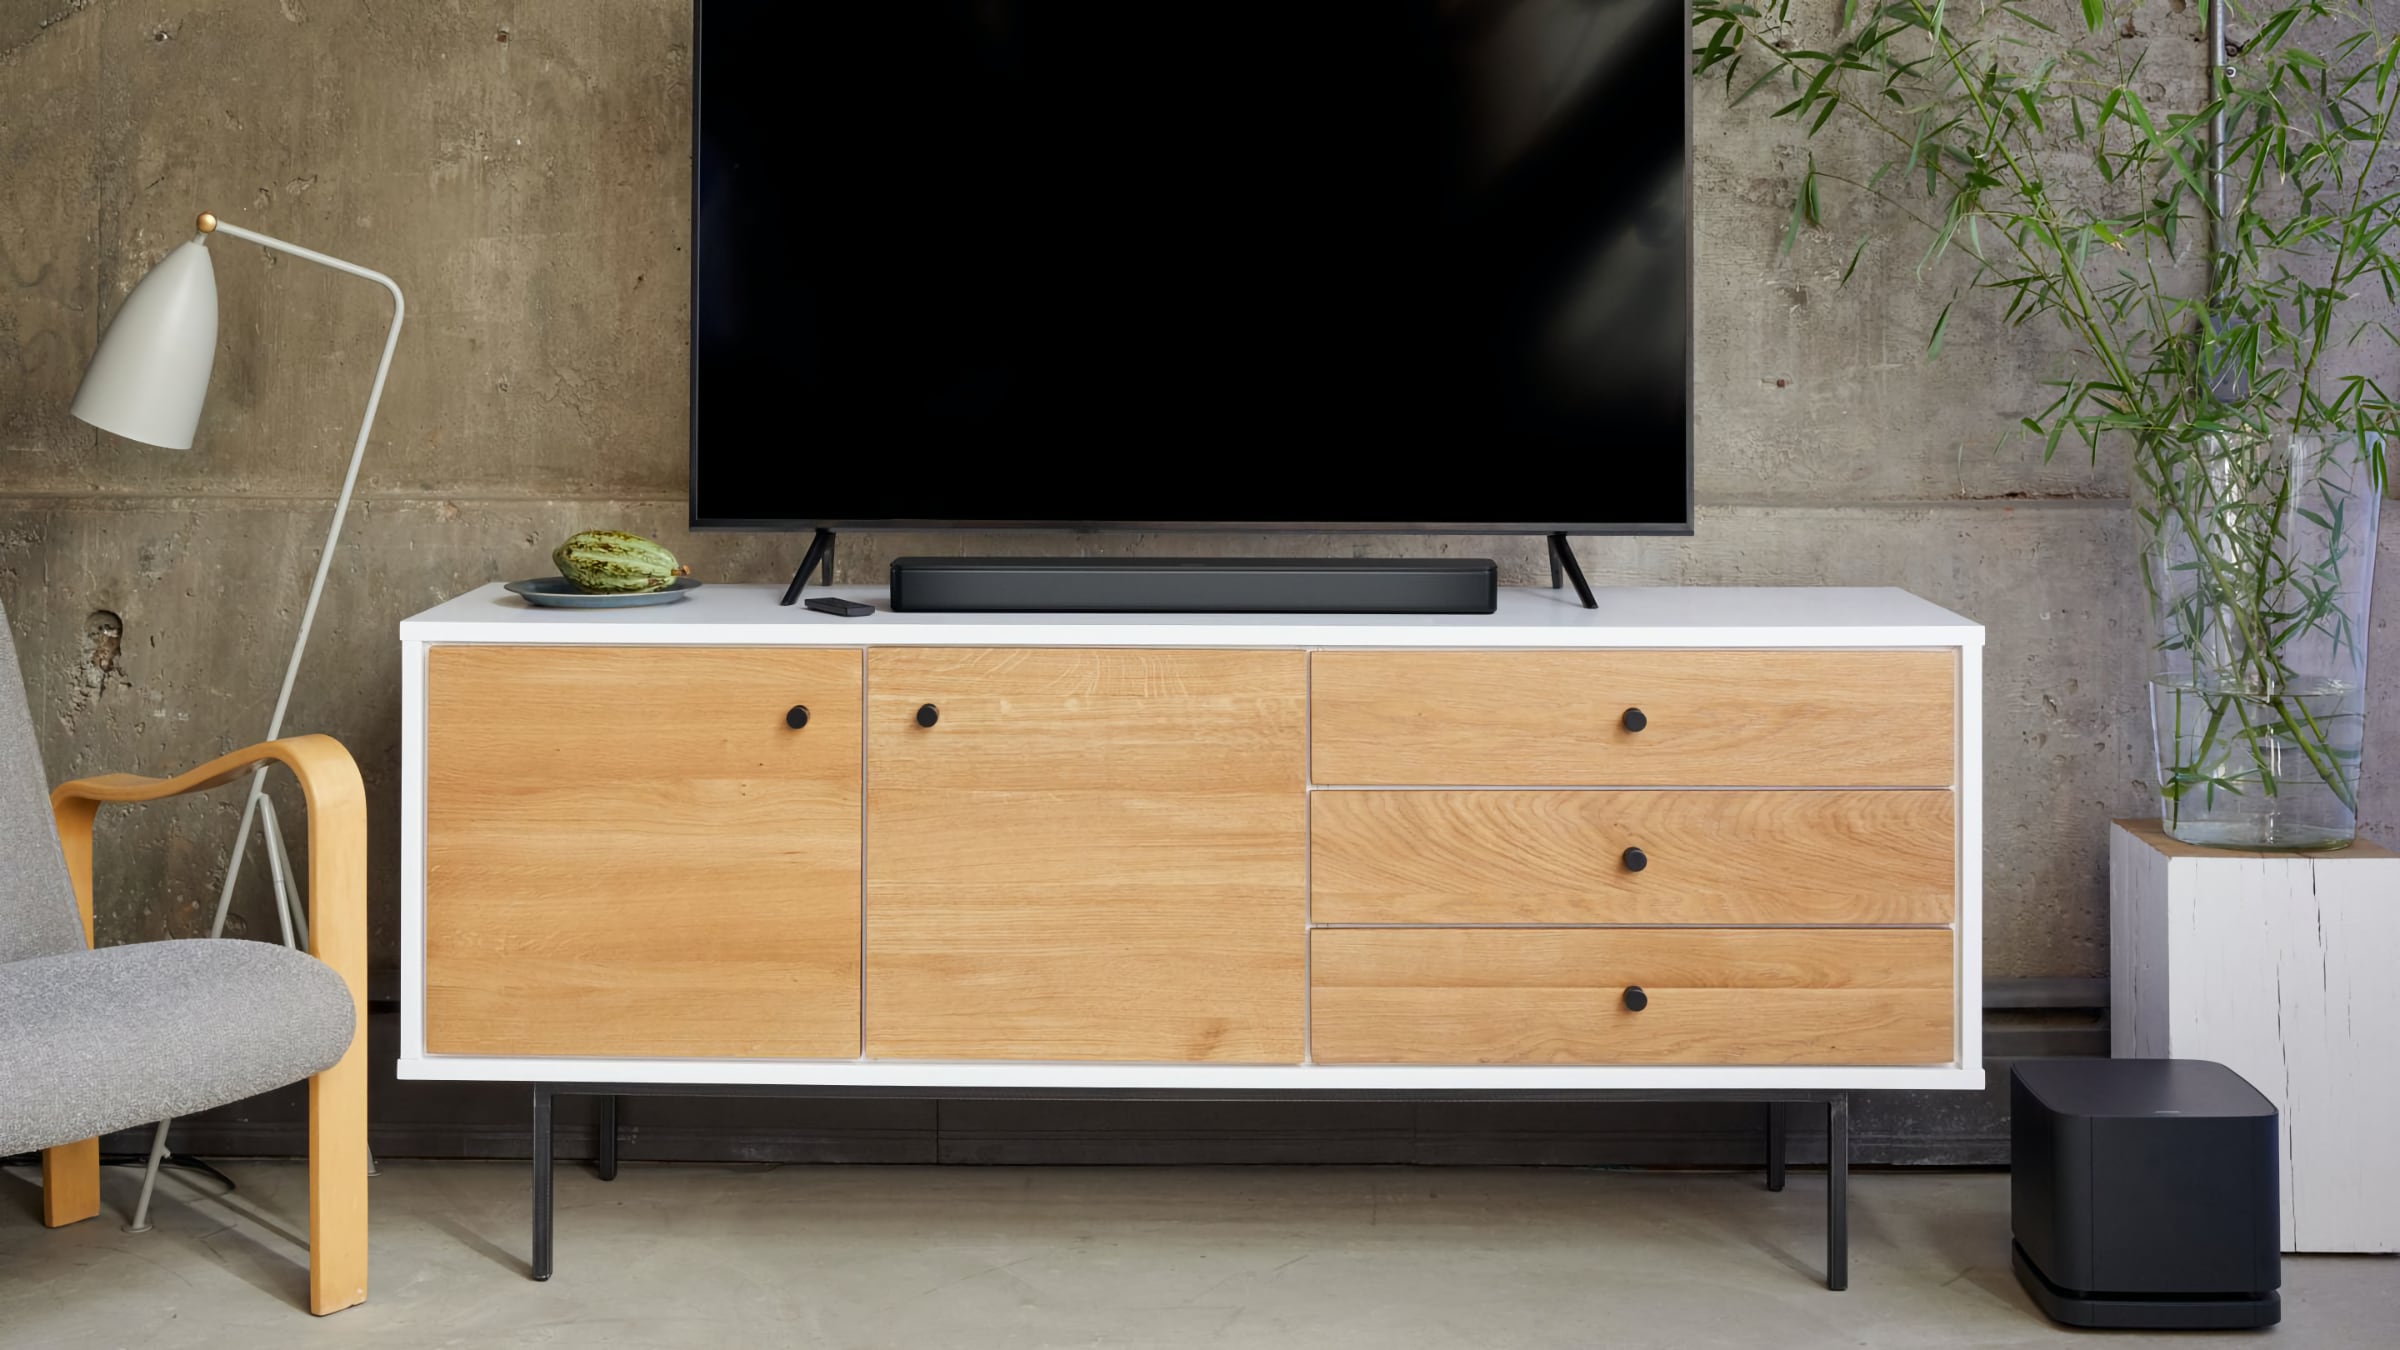 2 introduces - FlatpanelsHD Bose AirPlay with soundbar compact